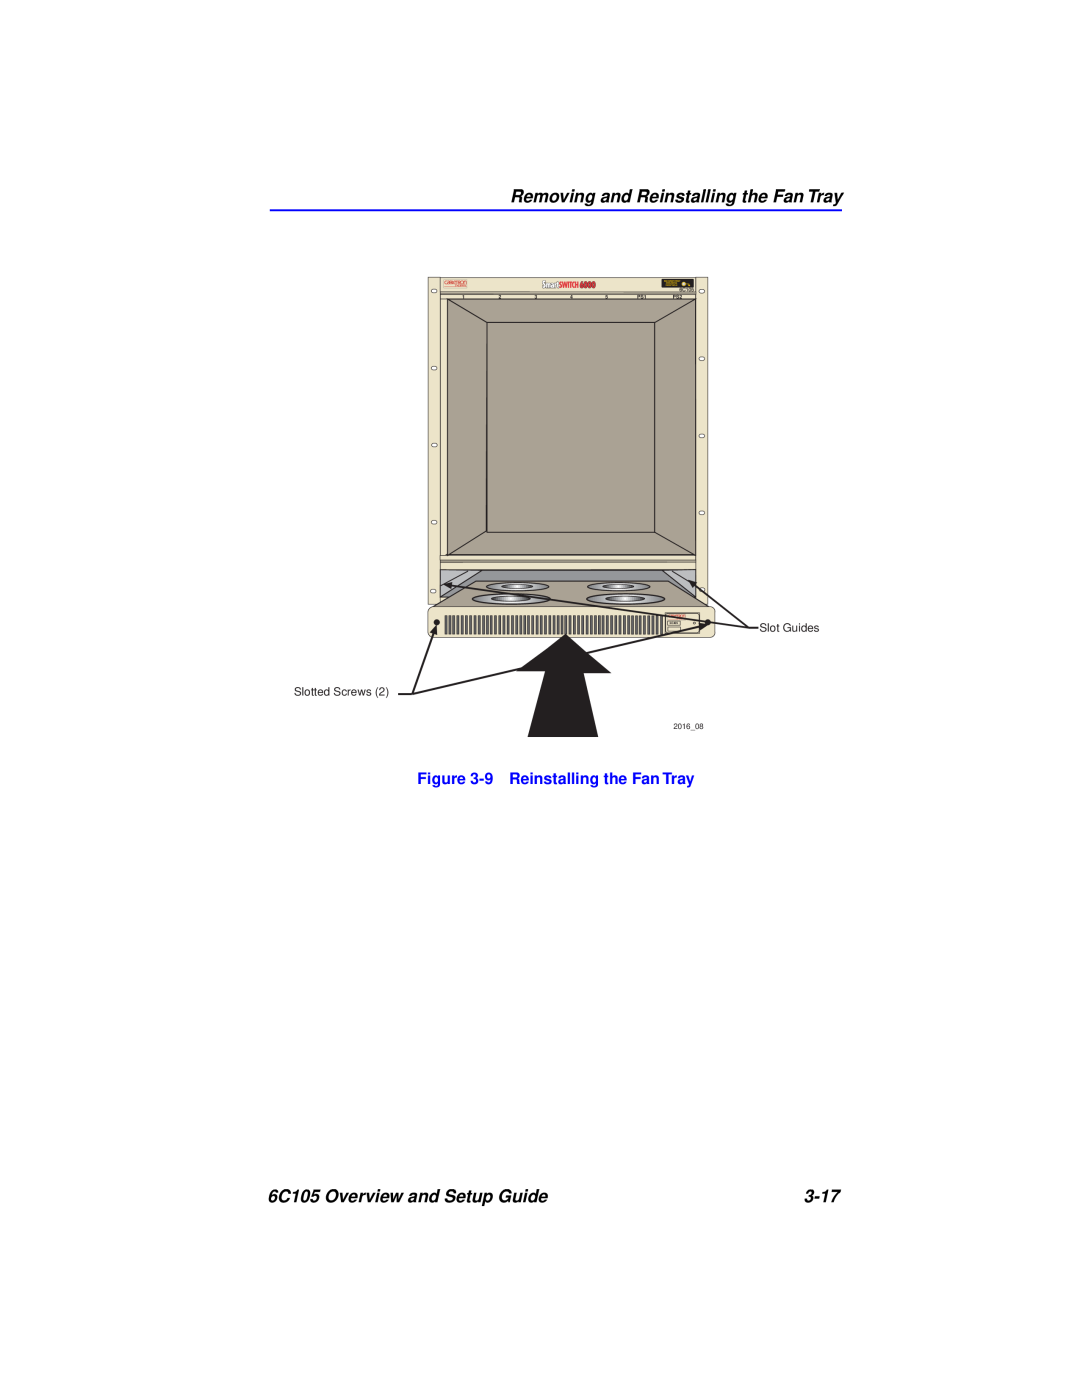 Cabletron Systems Removing and Reinstalling the Fan Tray, 6C105 Overview and Setup Guide, 3-17, Slot Guides, 201608 